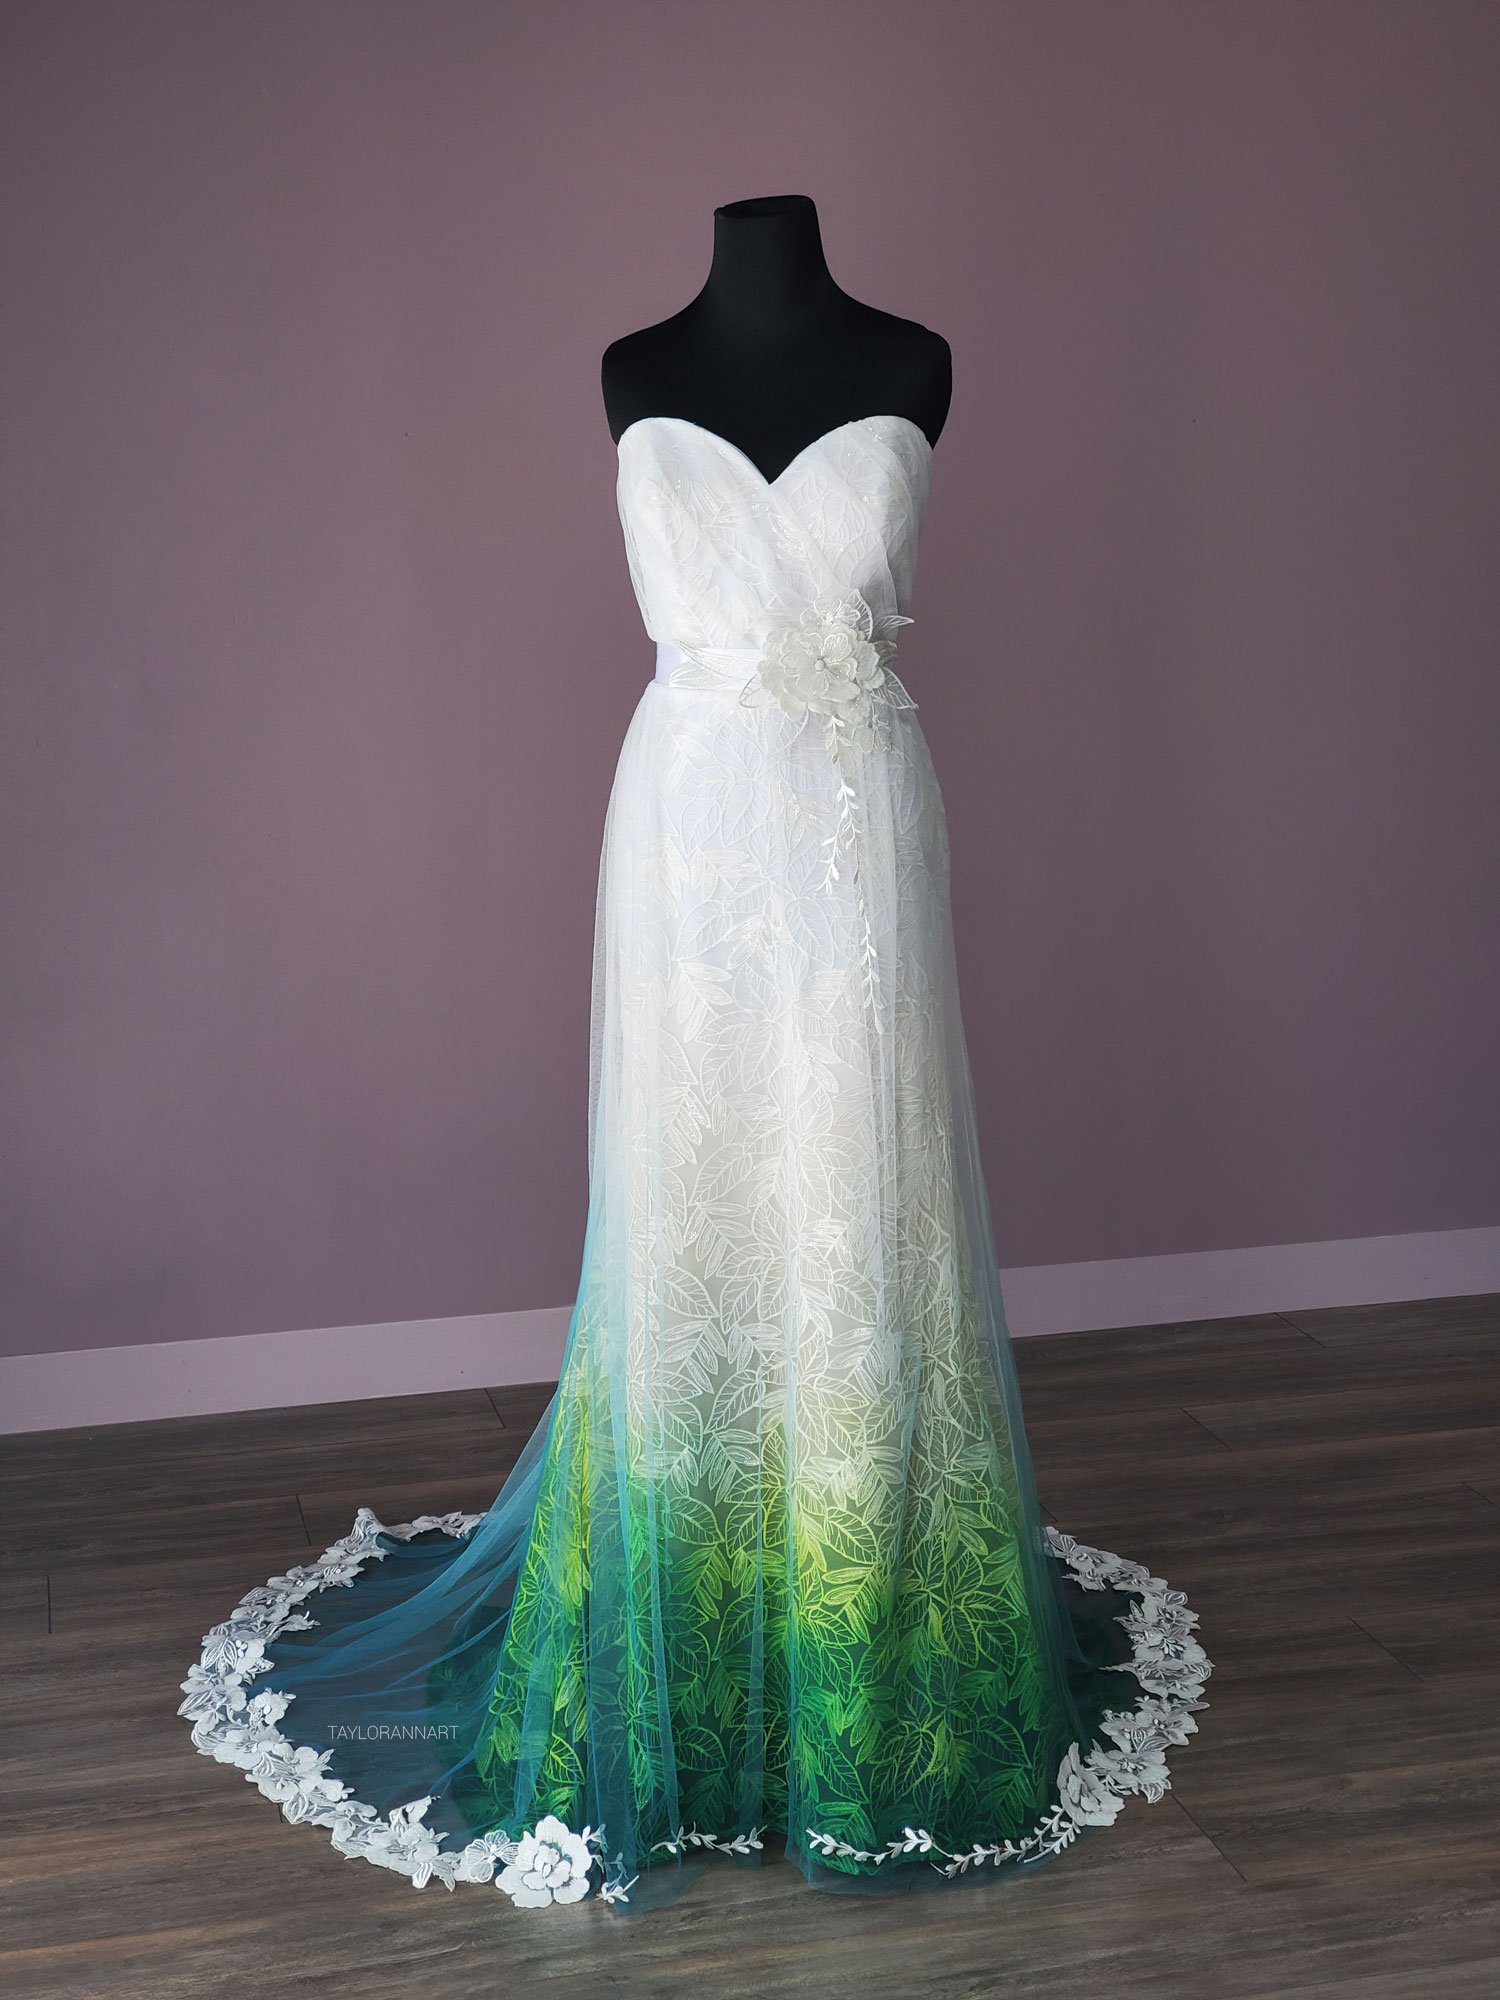 Emerald Green wedding dress-I don't want to wear white/ivory /champagne etc  is not my colour at all. I'm a redhead and want to reflect my style. Anyone  else worn anything but white